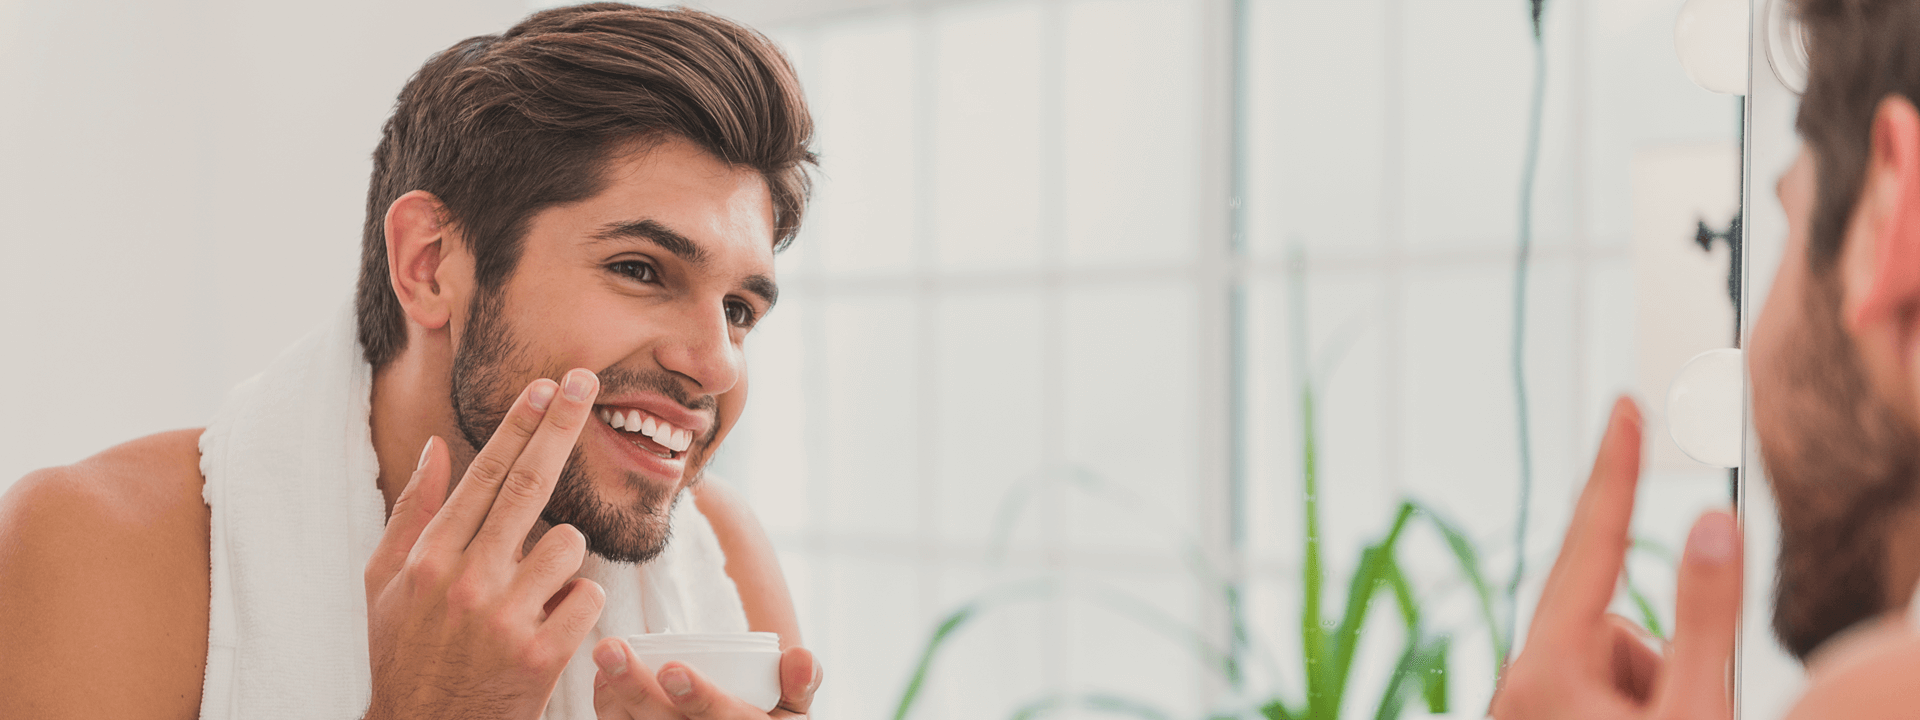 Why Skin Care For Men?